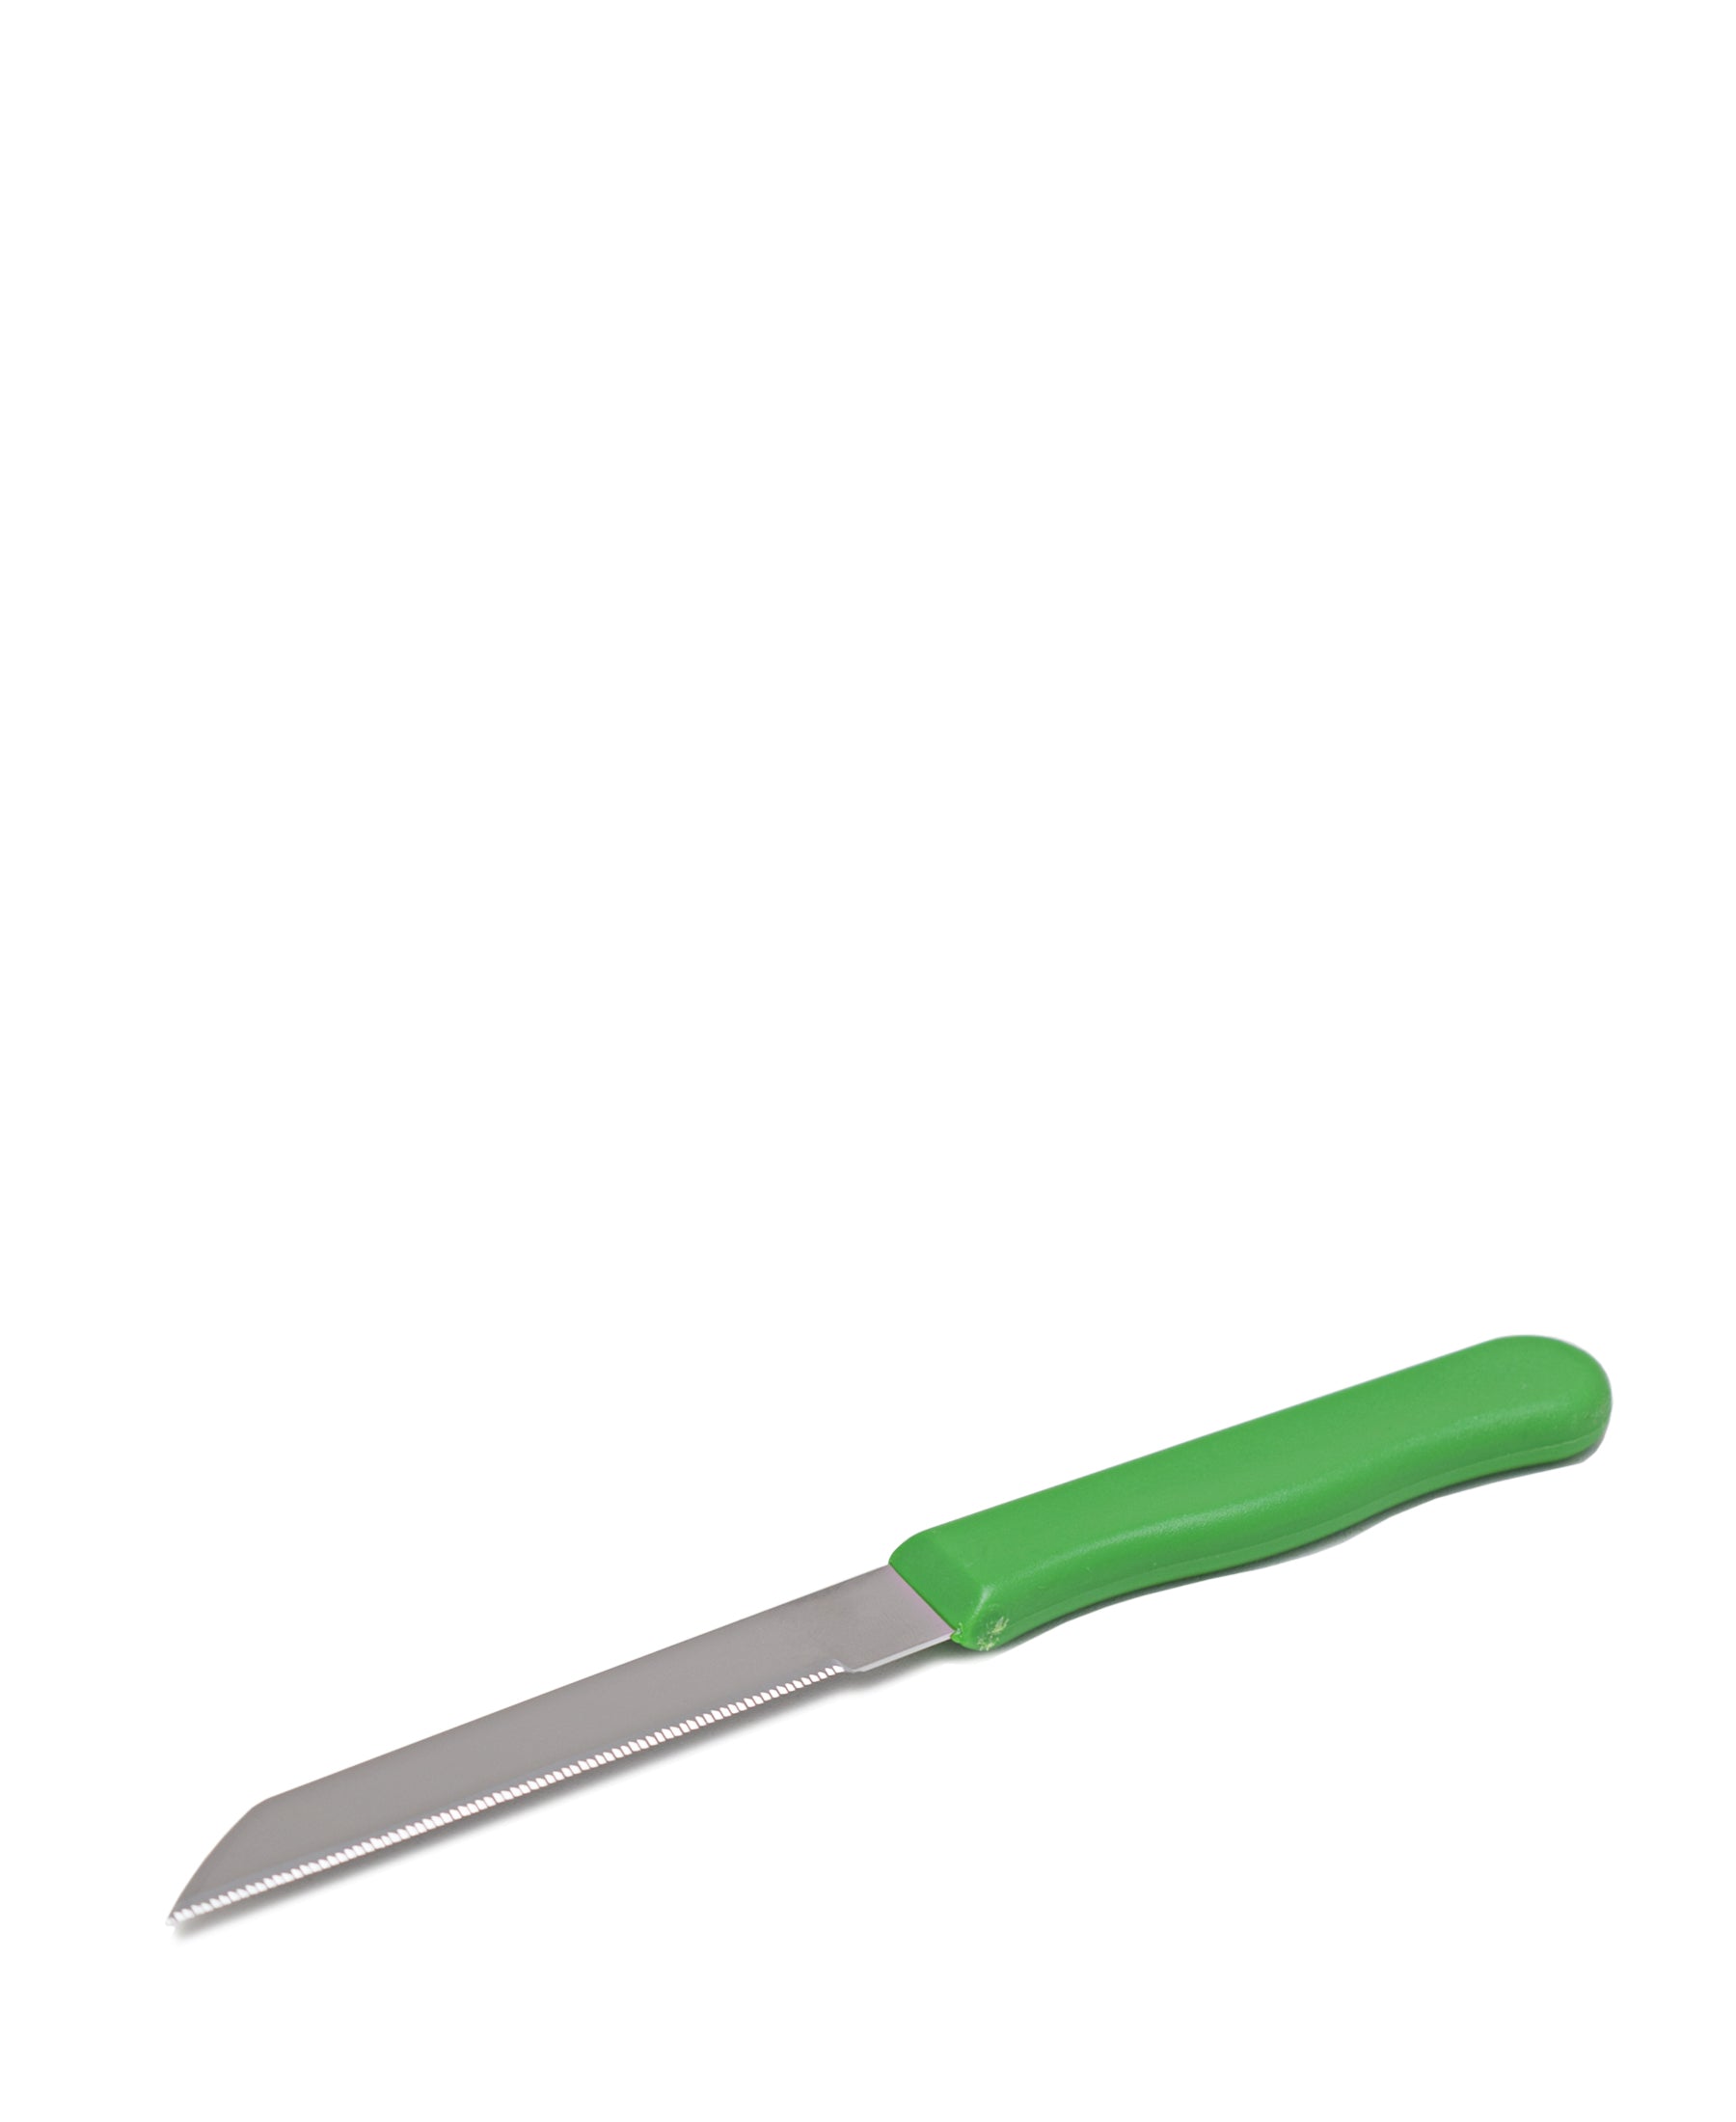 Fixwell Seretted Knife - Green